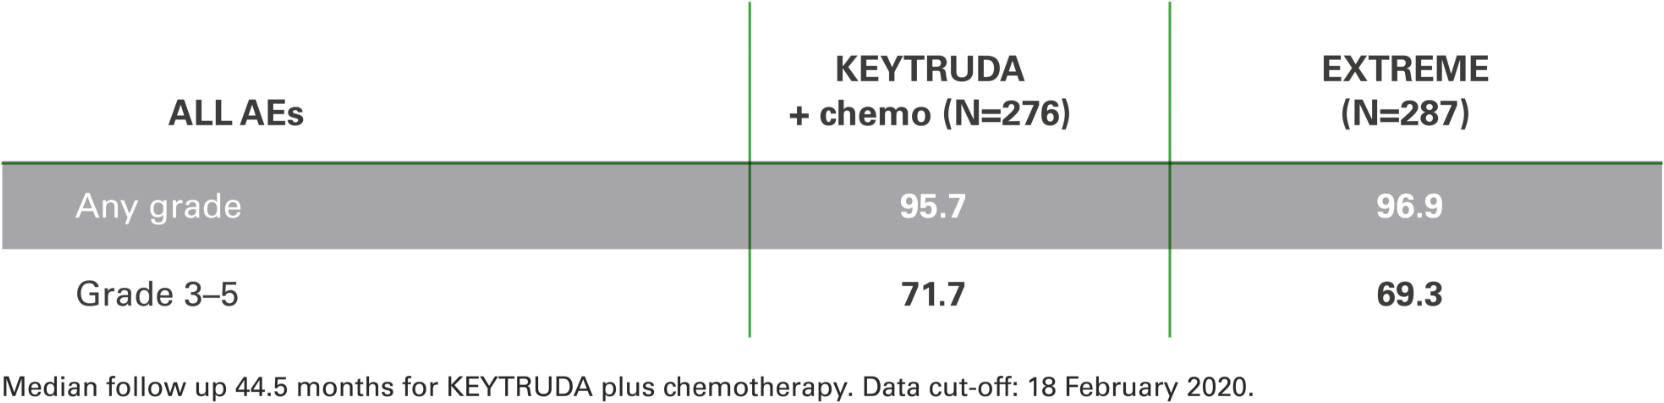 Table of treatment-related adverse events for HNSCC patients at 4 years in KEYNOTE 048 for KEYTRUDA (pembrolizumab) plus chemotherapy vs EXTREME